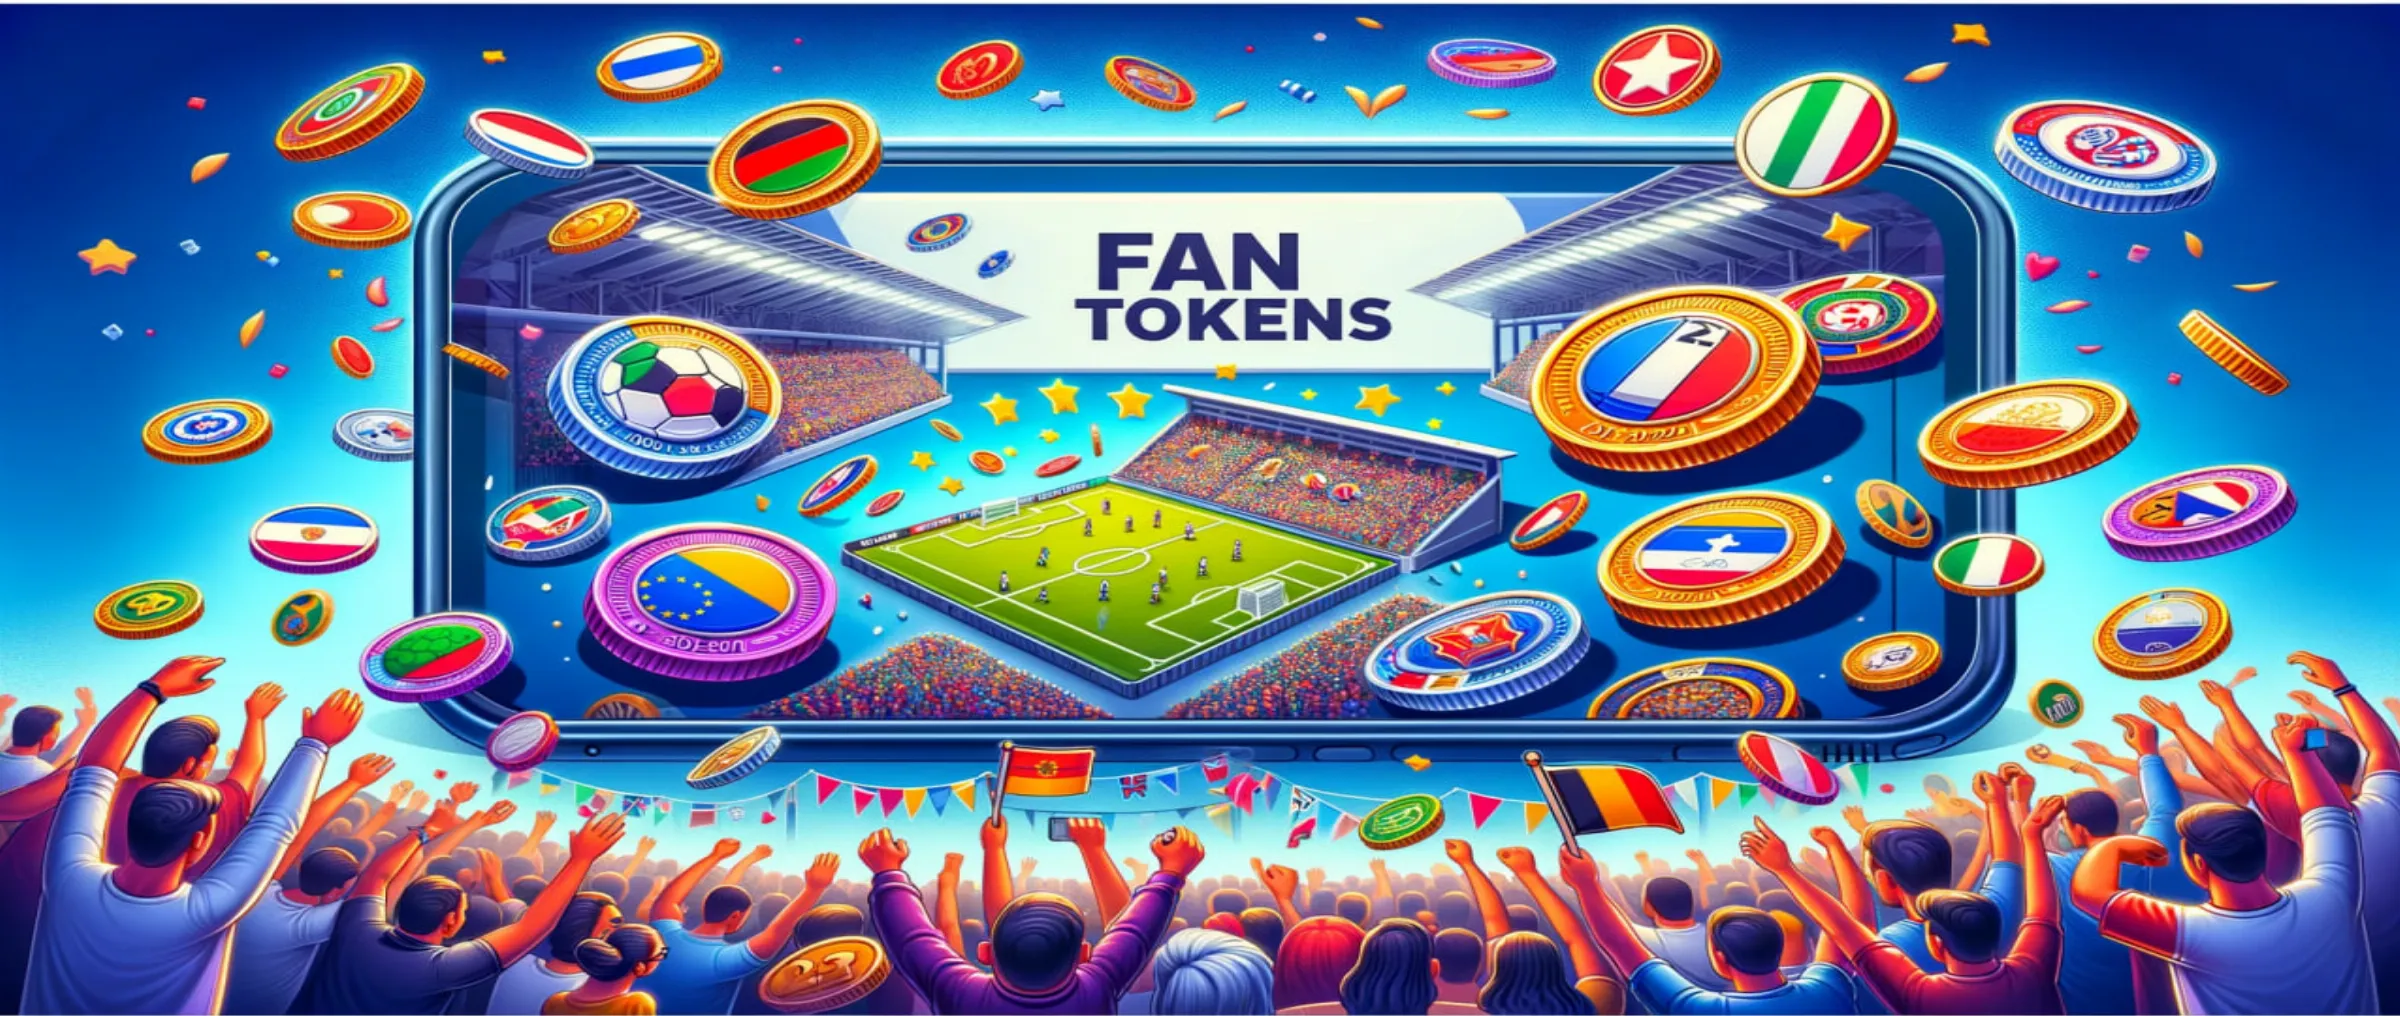 Investments in fan tokens are growing amid football fever